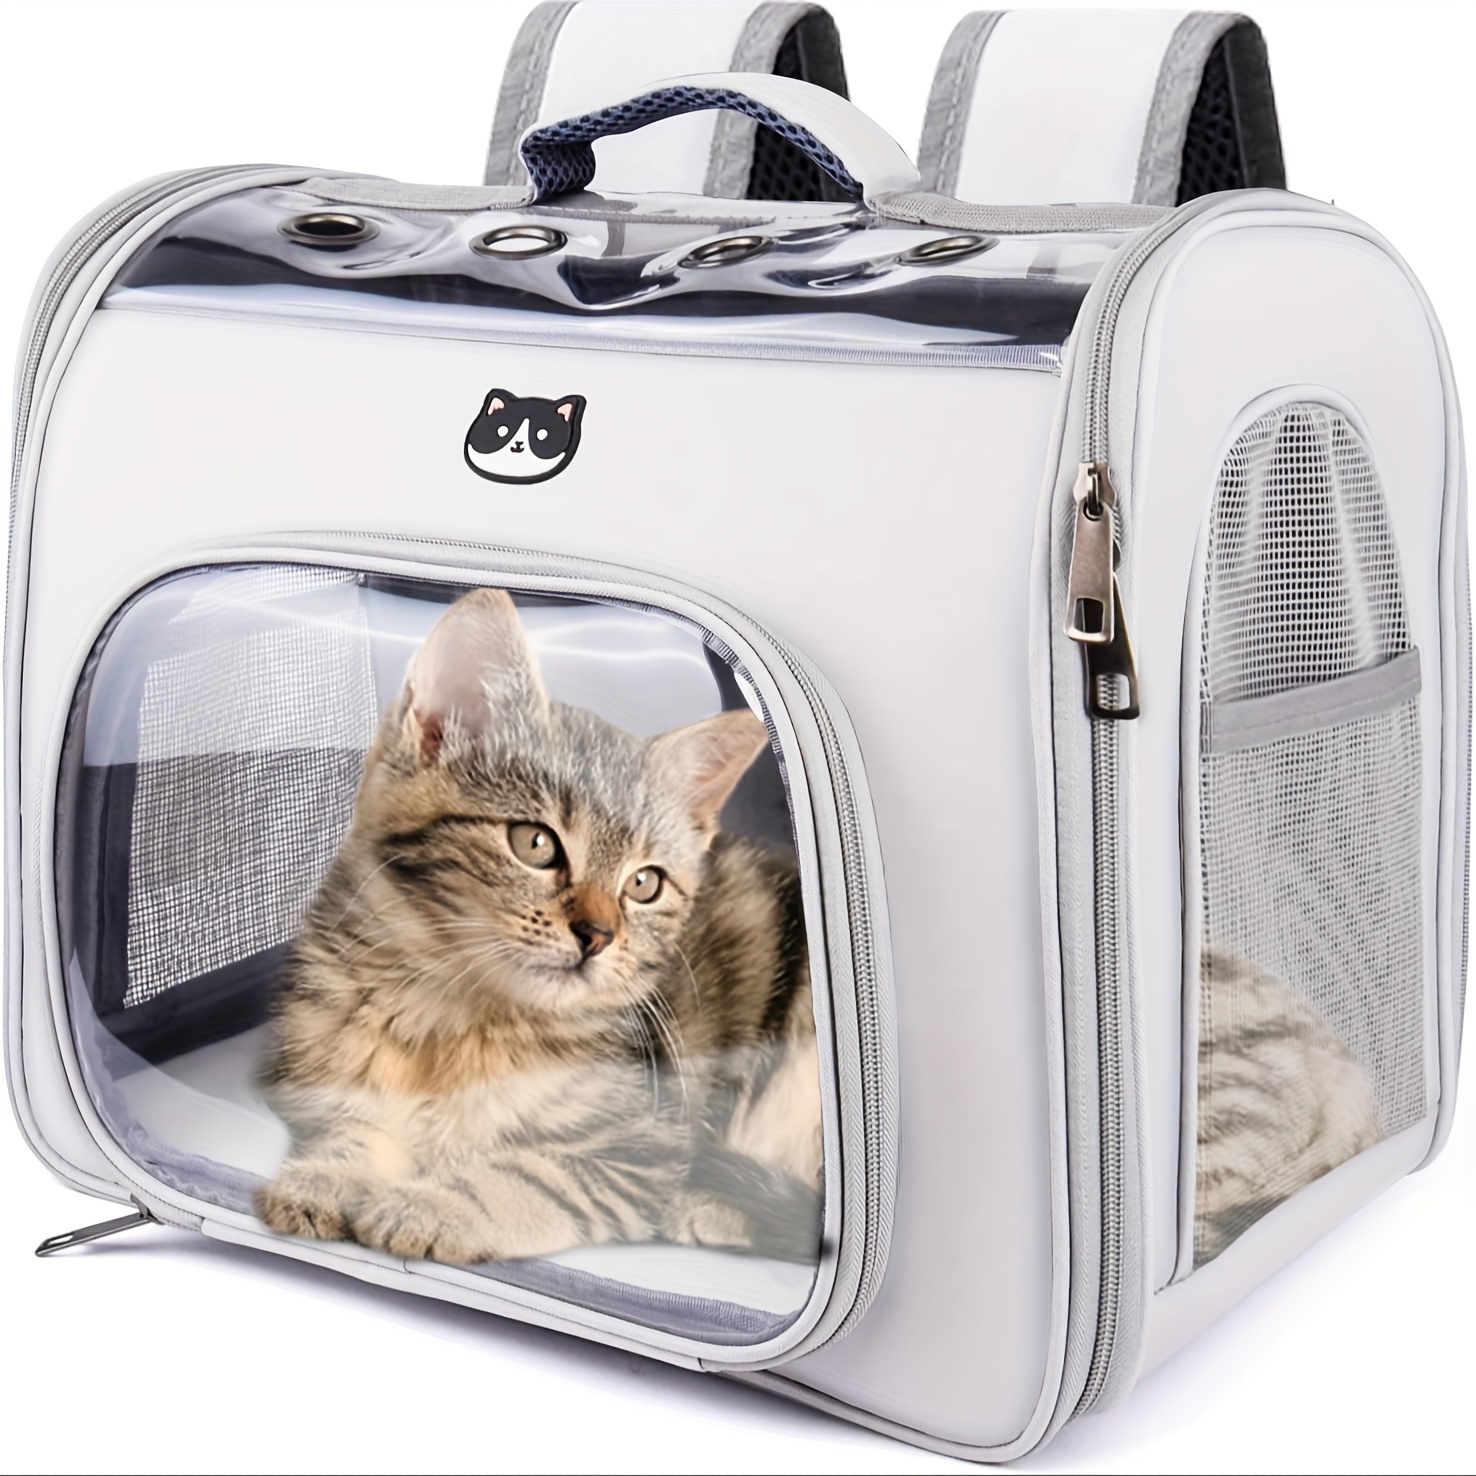 Pet Carrier Backpack For Cats, Dogs And Small Animals, Portable Pet Travel  Carrier, Super Ventilated Design, Airline Approved, Ideal For